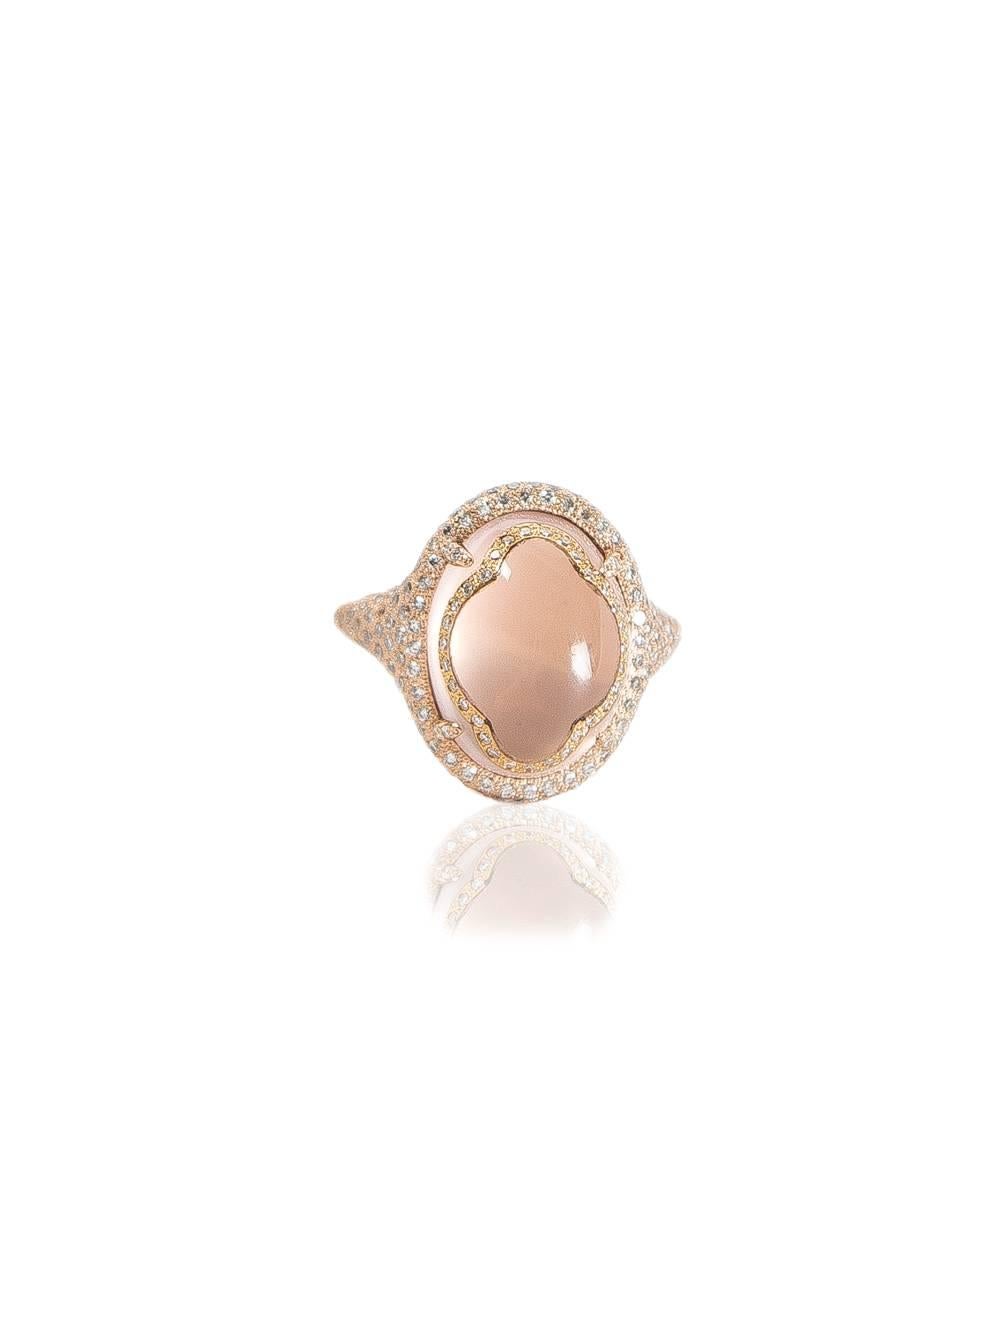 18kt rose gold ring with white diamonds ct. 0,81.

Handmade in Italy

Made-to-order production time: 4 weeks